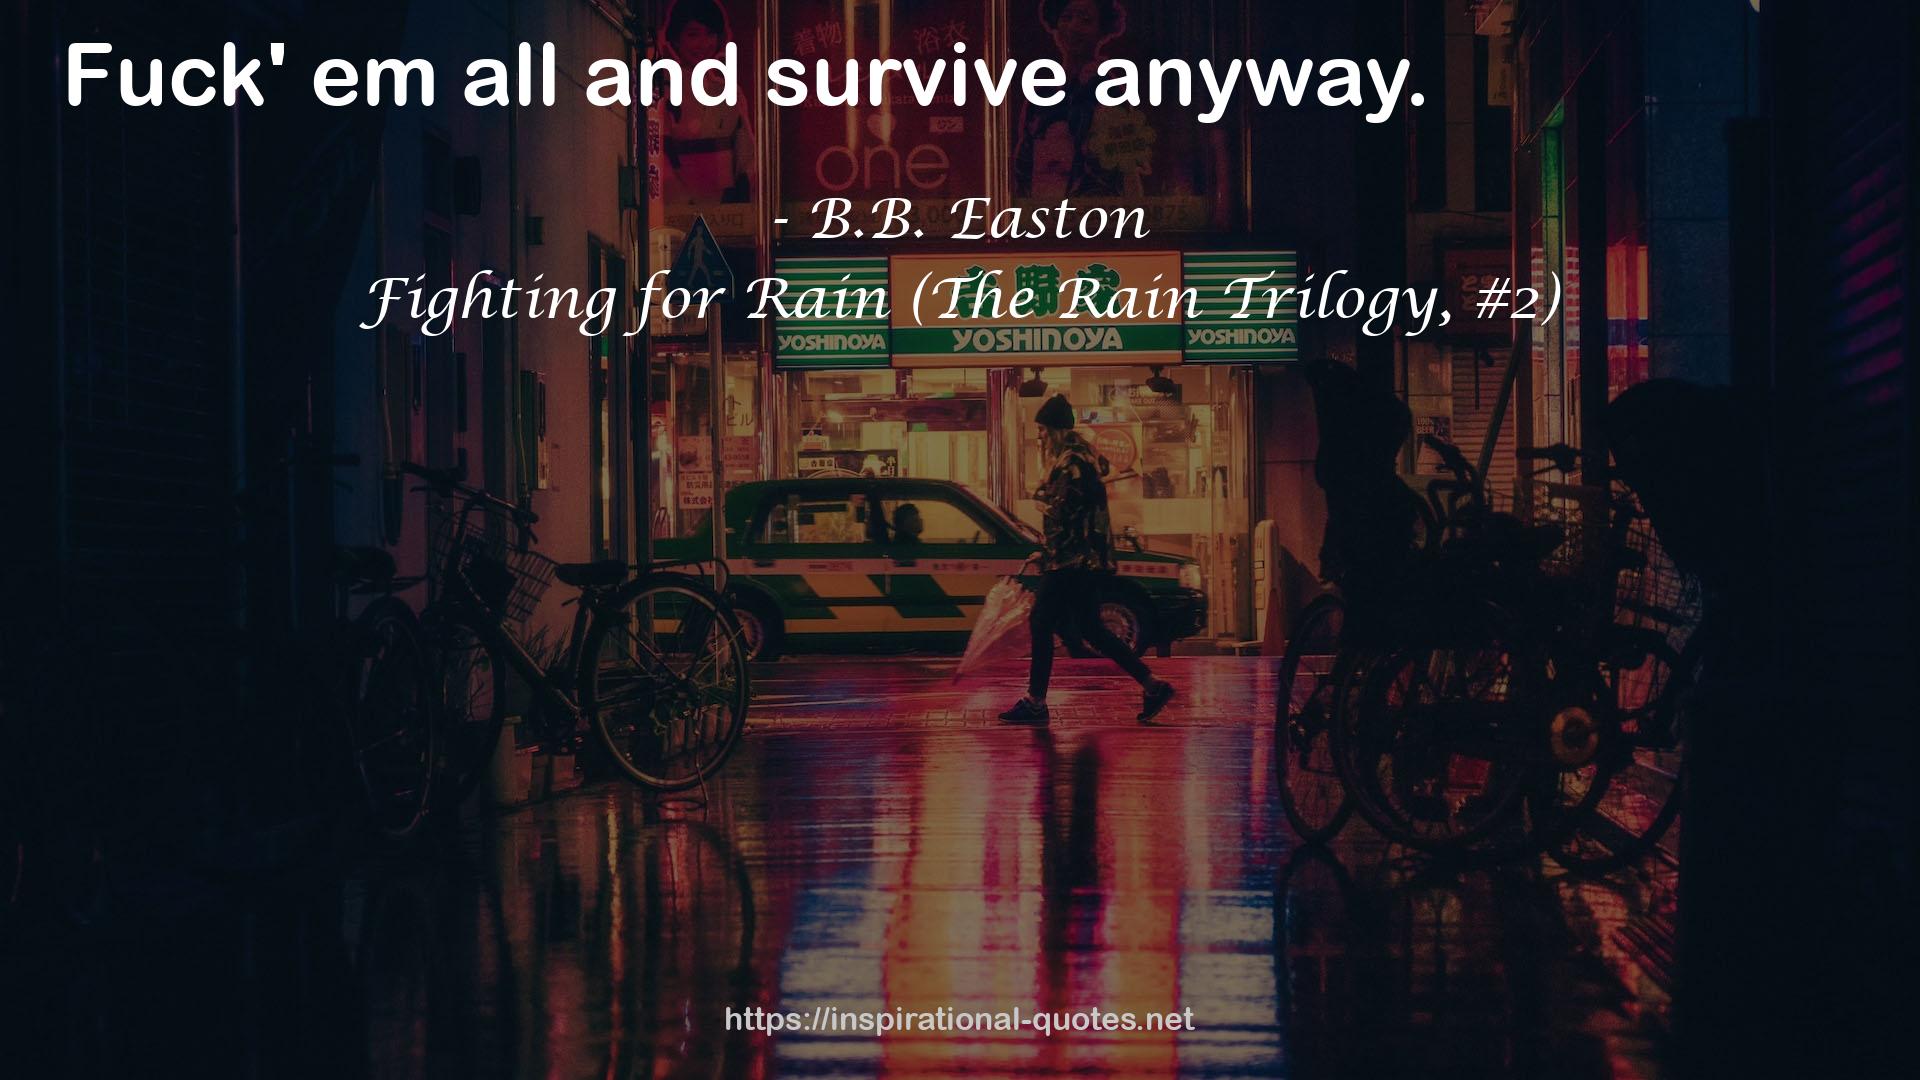 Fighting for Rain (The Rain Trilogy, #2) QUOTES